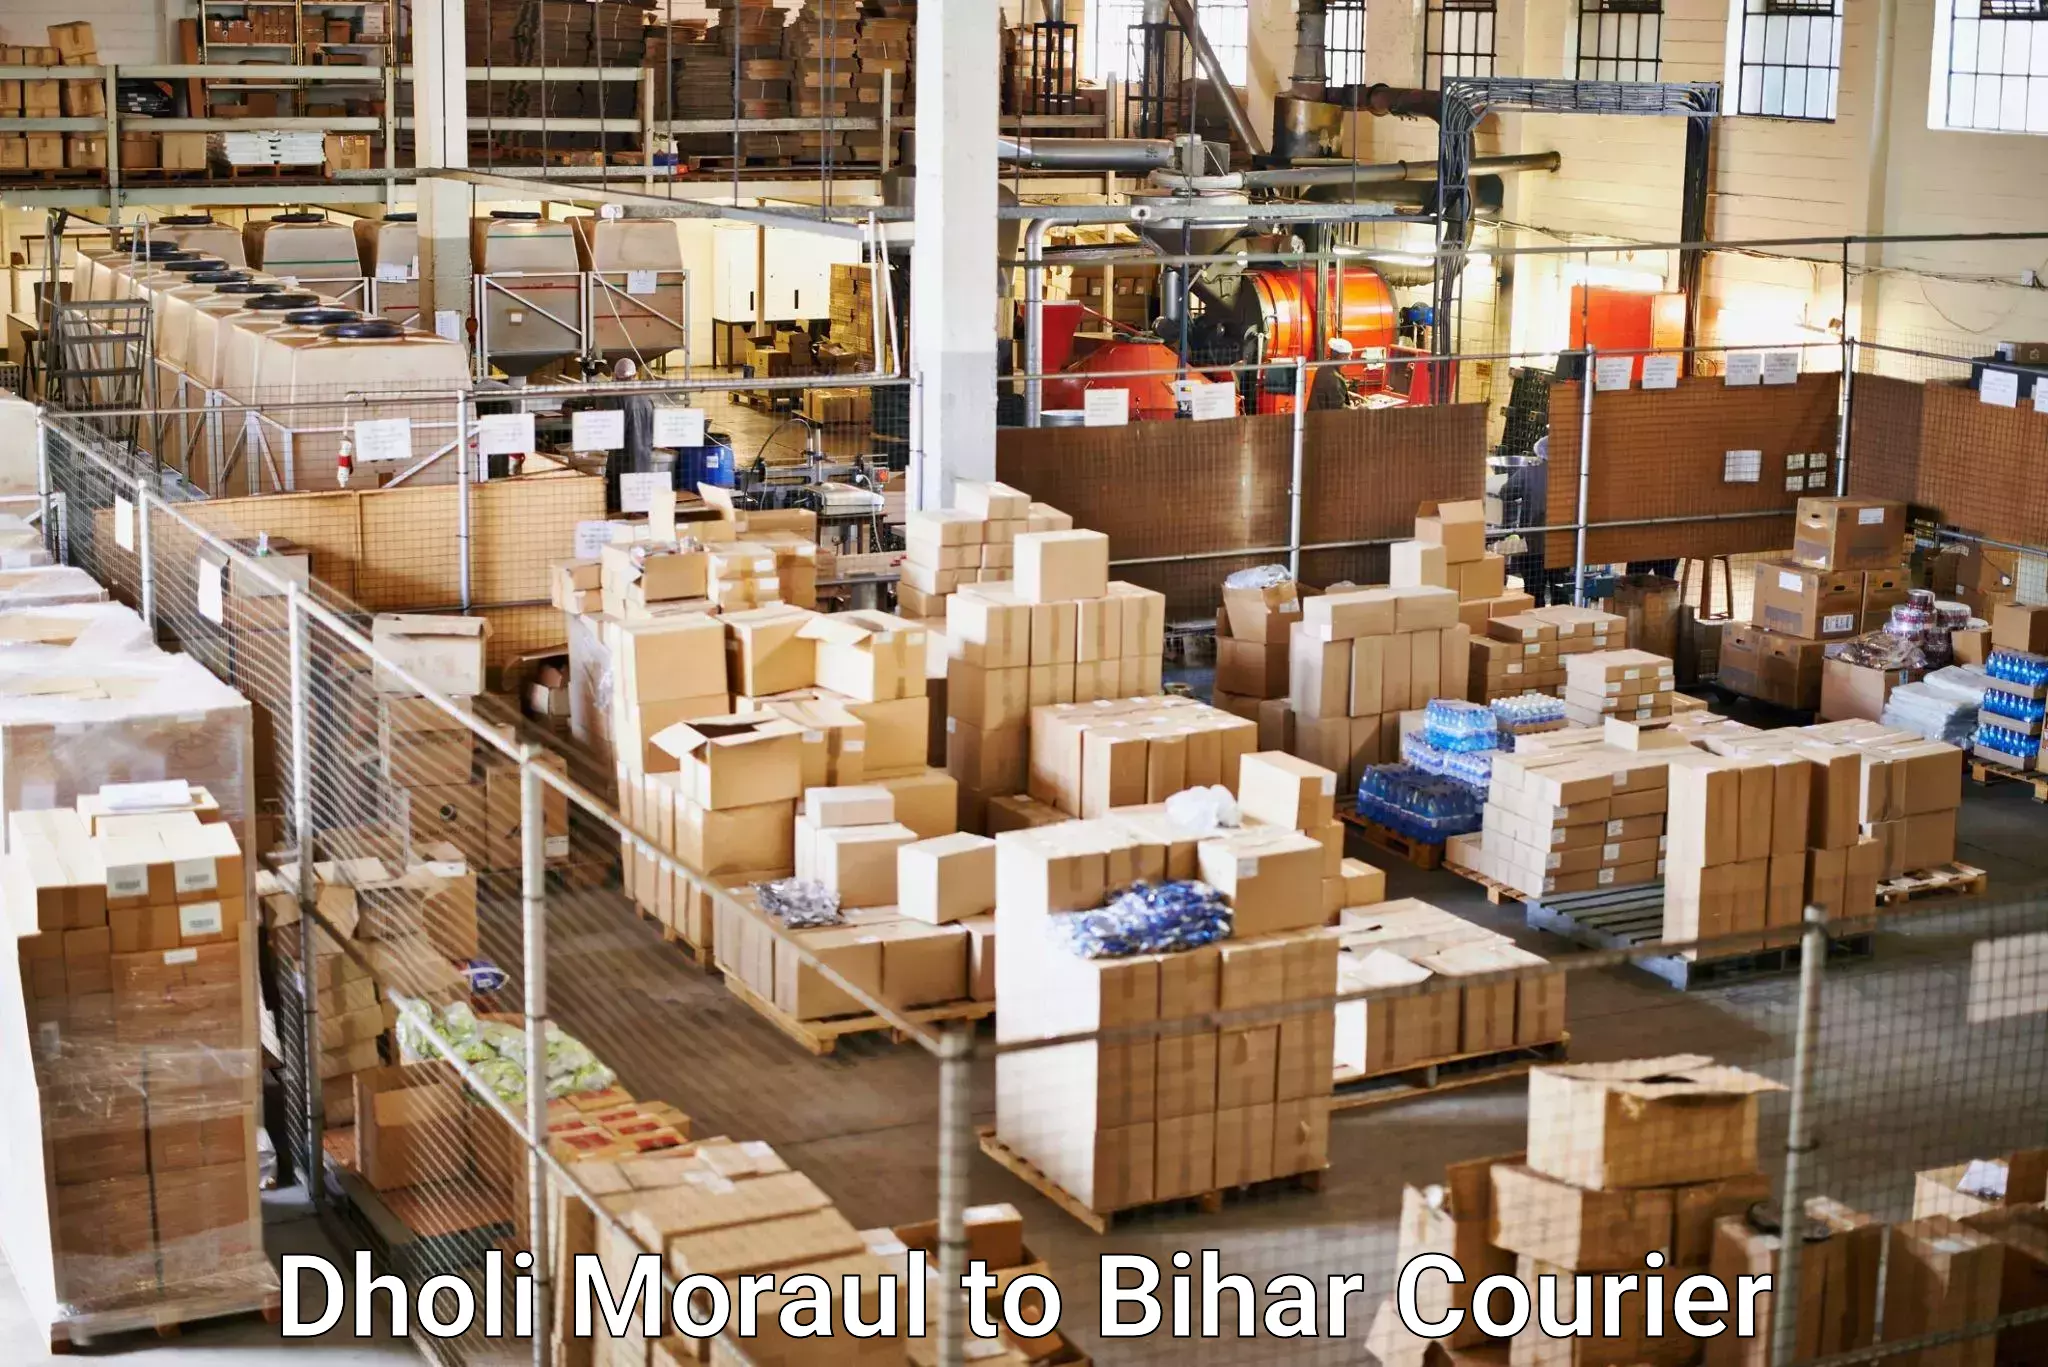 Express delivery solutions Dholi Moraul to Sheohar